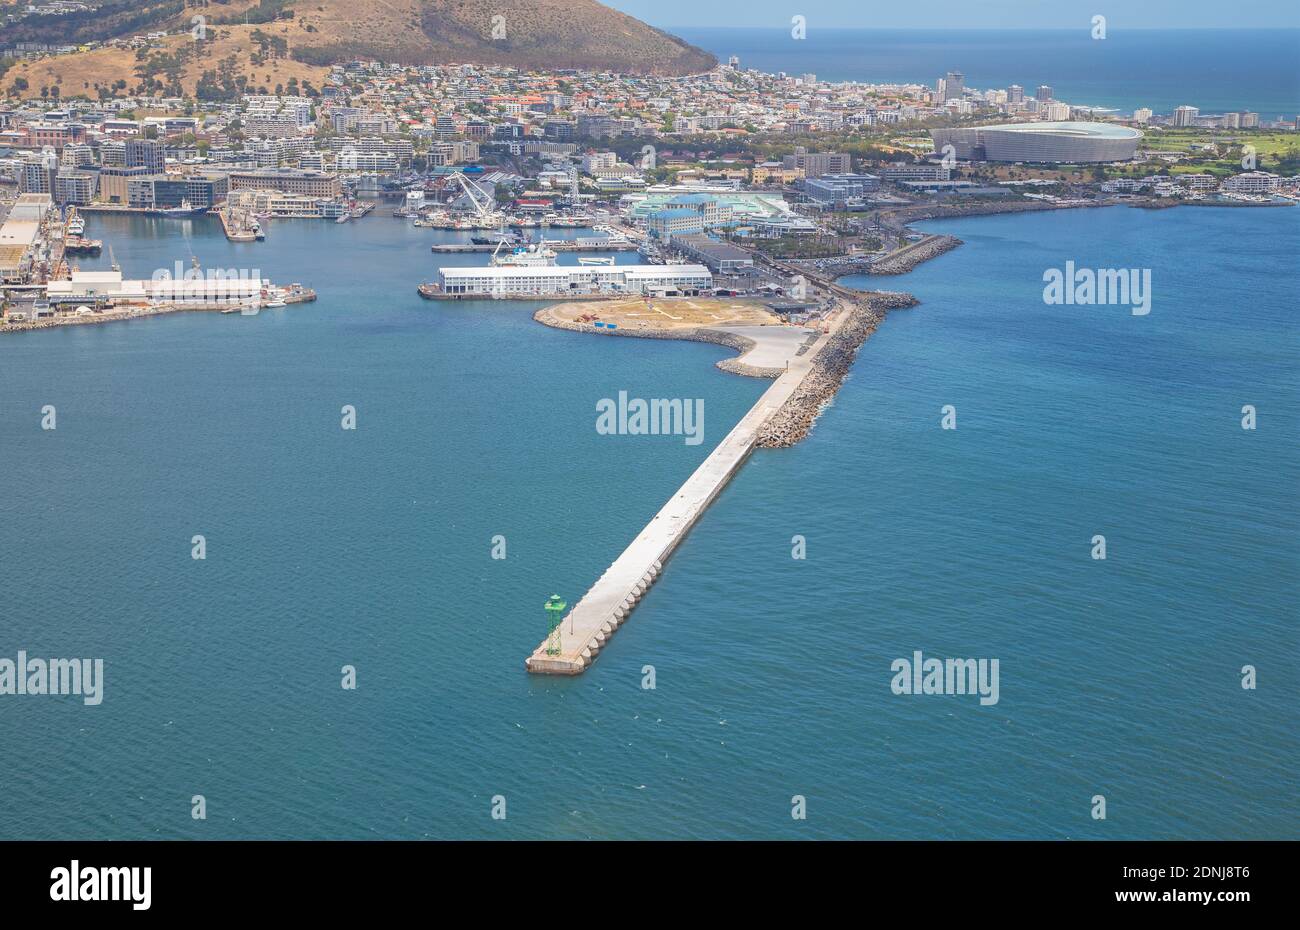 Cape Town, Western Cape / South Africa - 11/26/2020: Aerial photo of V&A Waterfront helipads and breakwater with Cape Town 2010 Stadium in the backgro Stock Photo